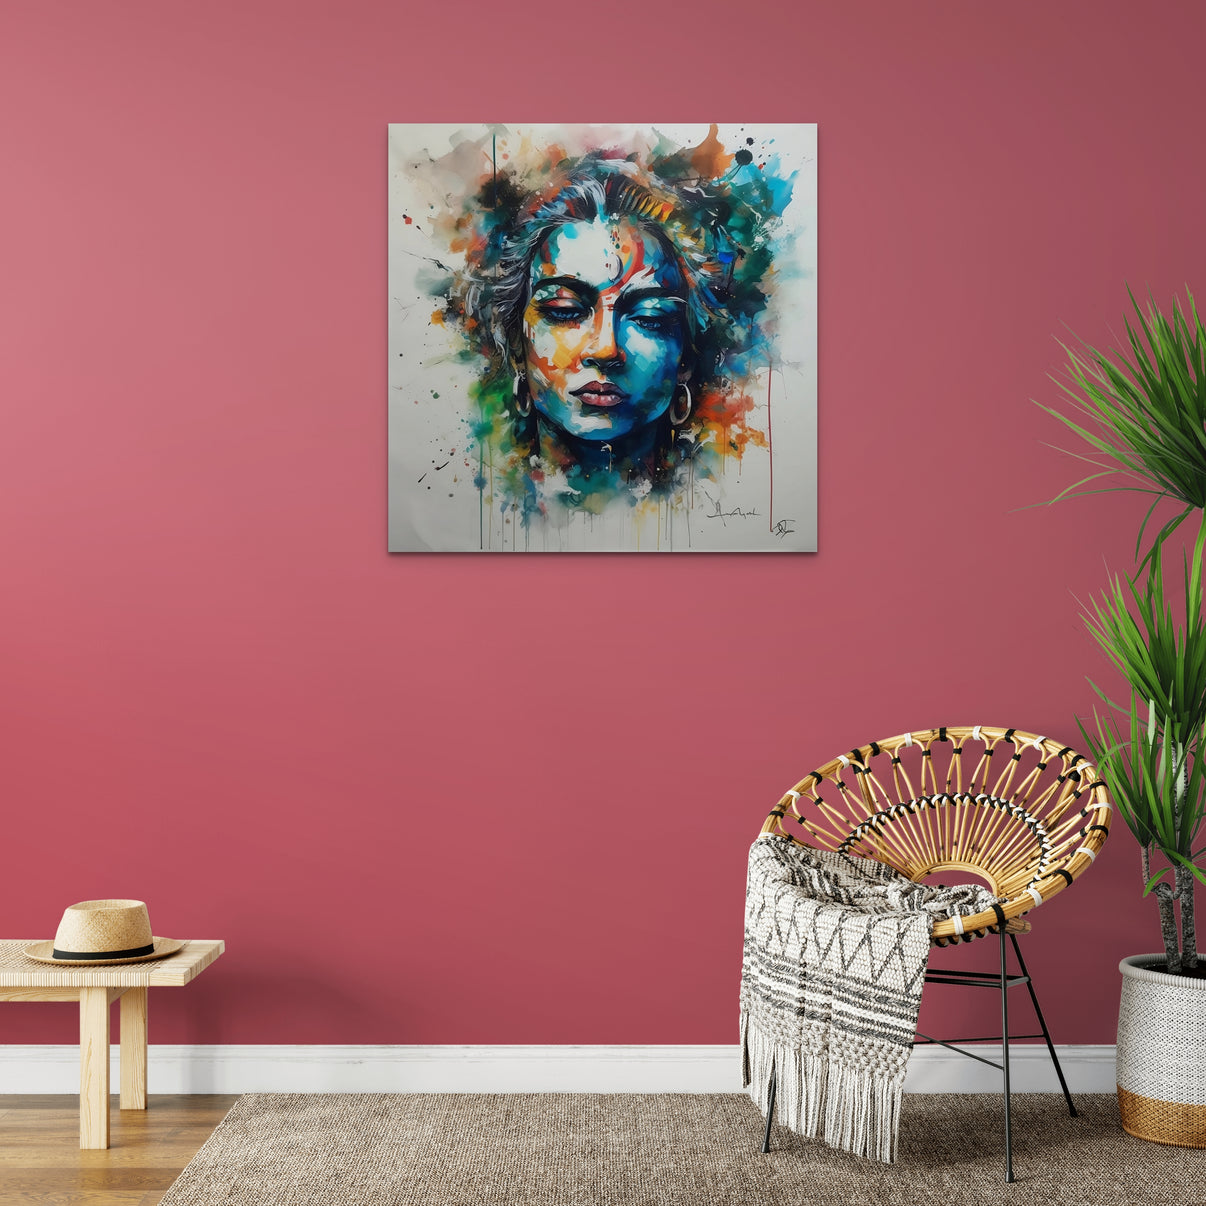 Krishna's Chromatic Abstraction: A Vibrant Portrait Print of the Divin